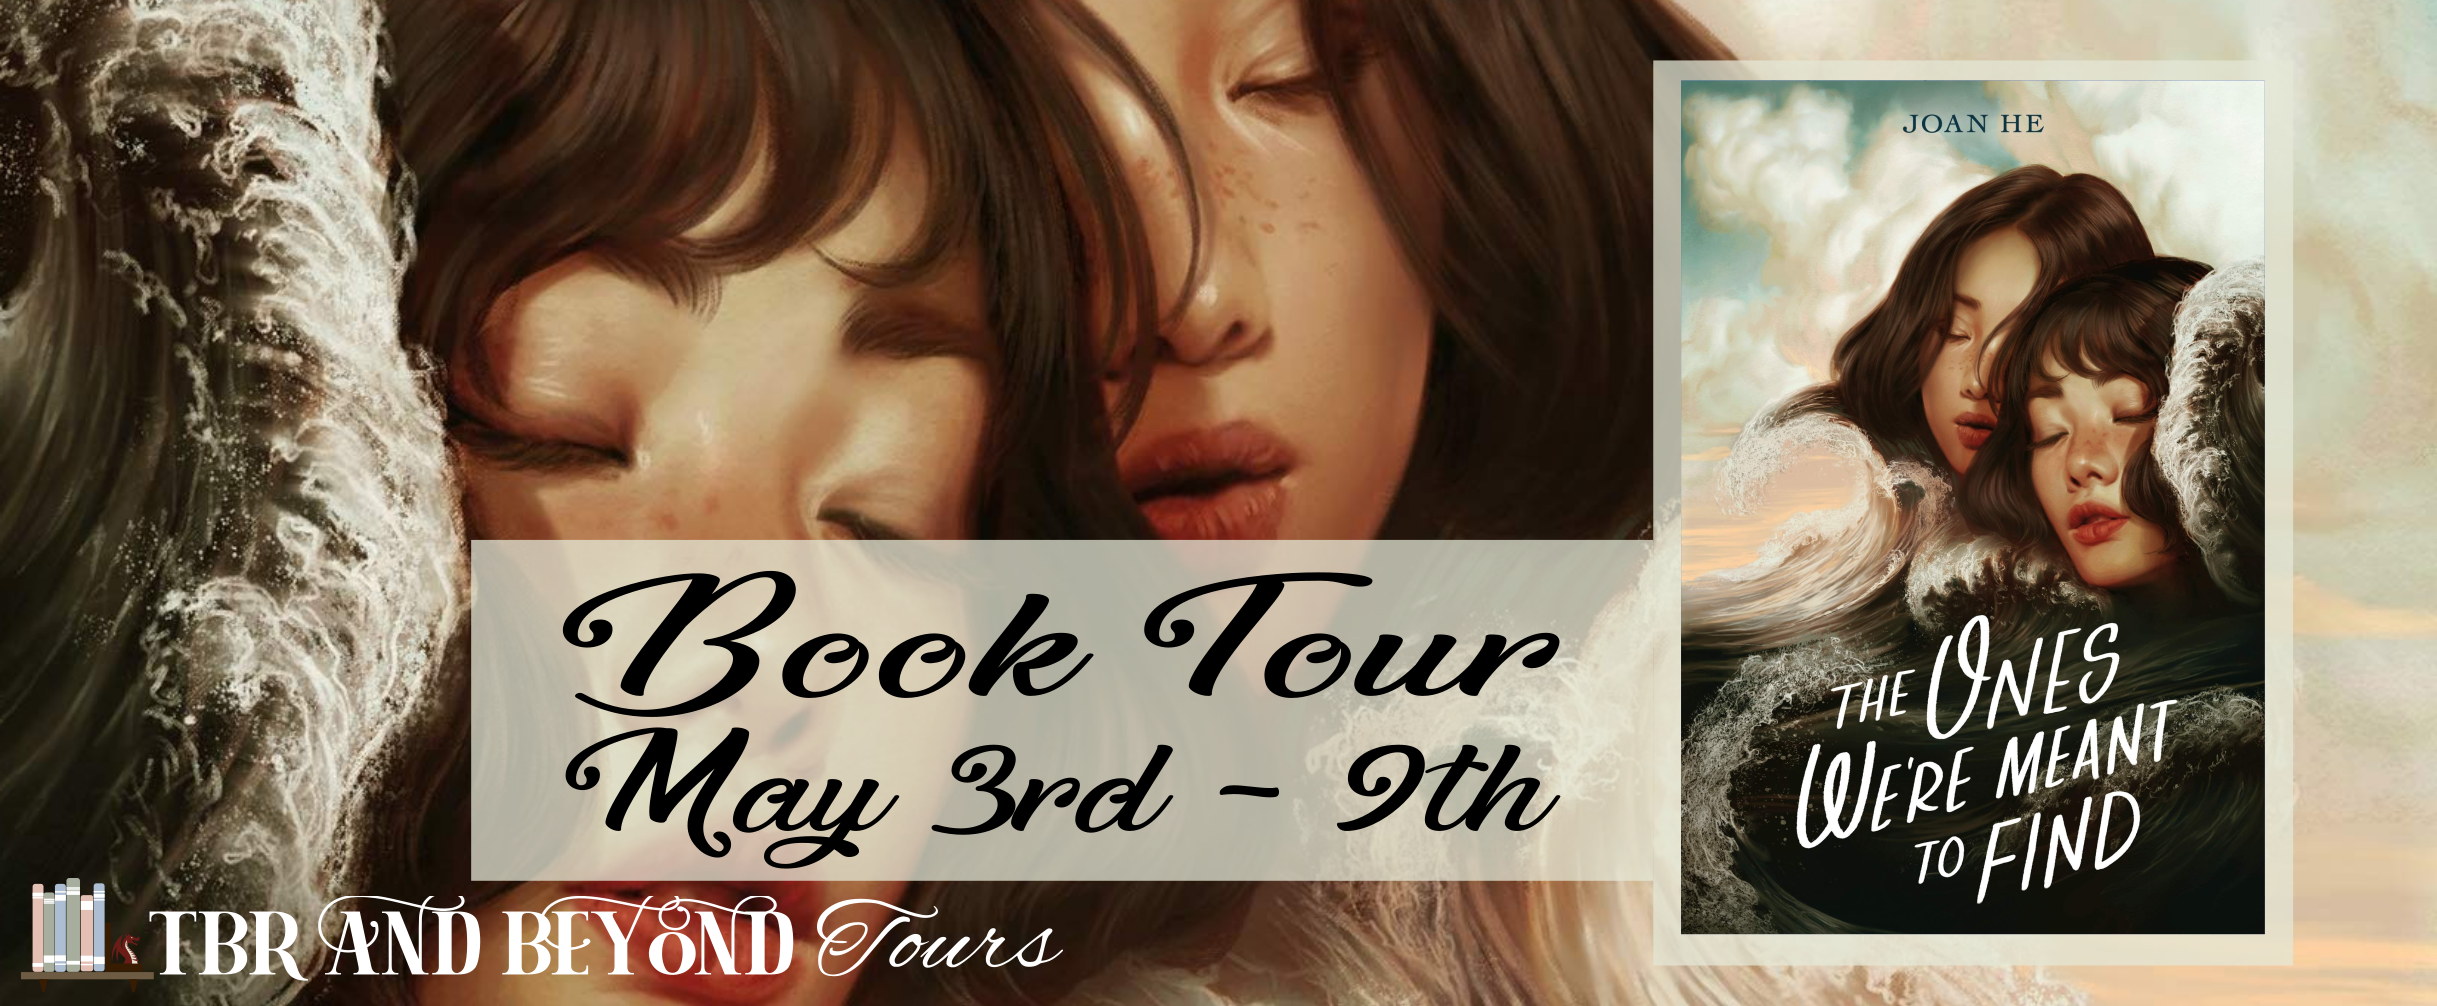 Blog Tour: The Ones We're Meant to Find by Joan He (Interview + Giveaway!)